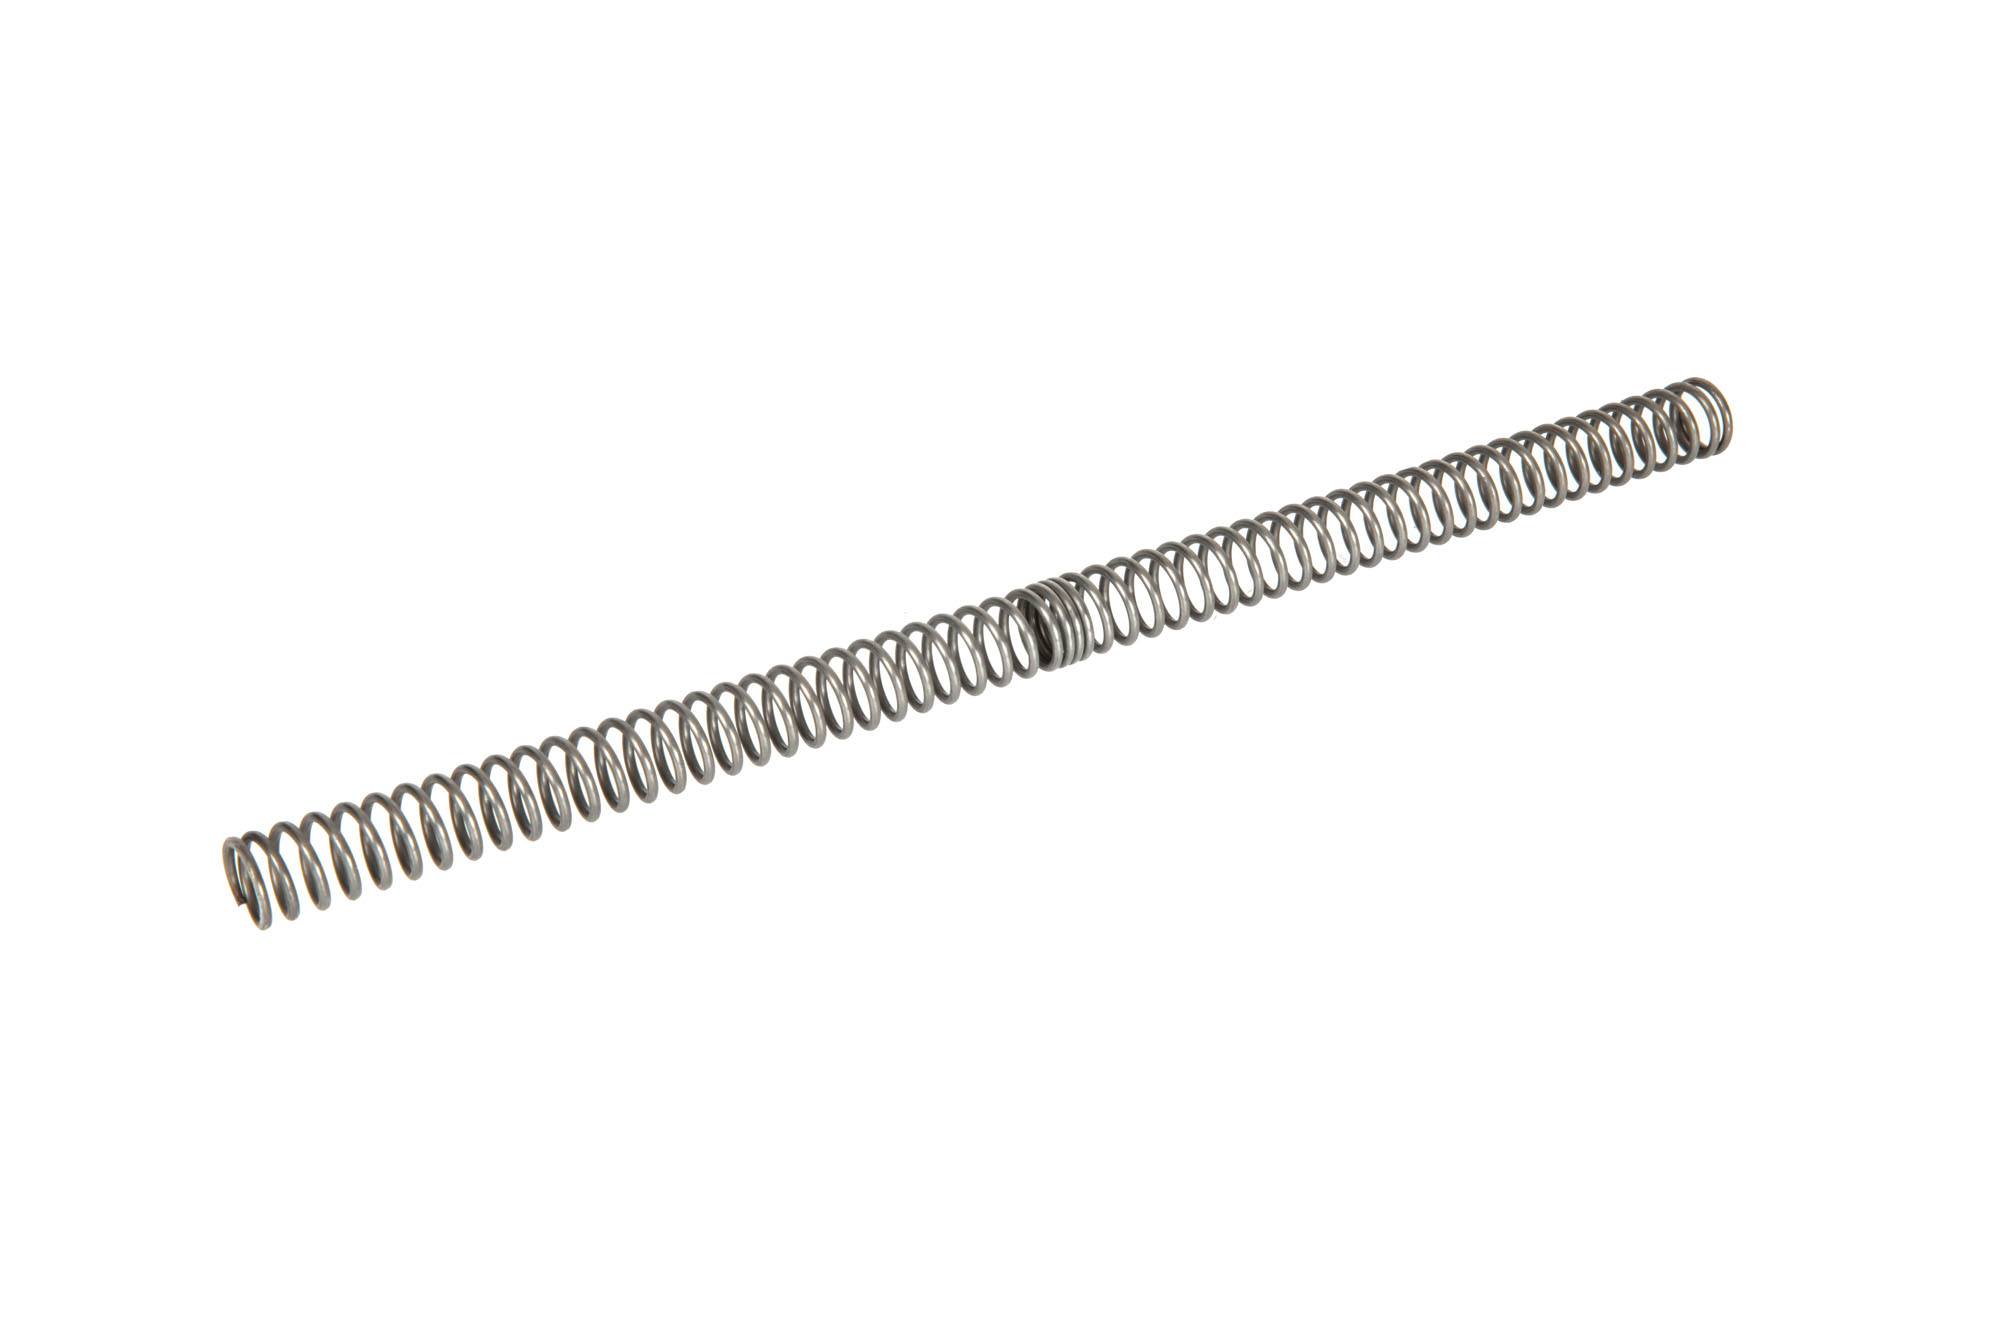 M150 Spring for SRS Replicas - Pull Bolt Version